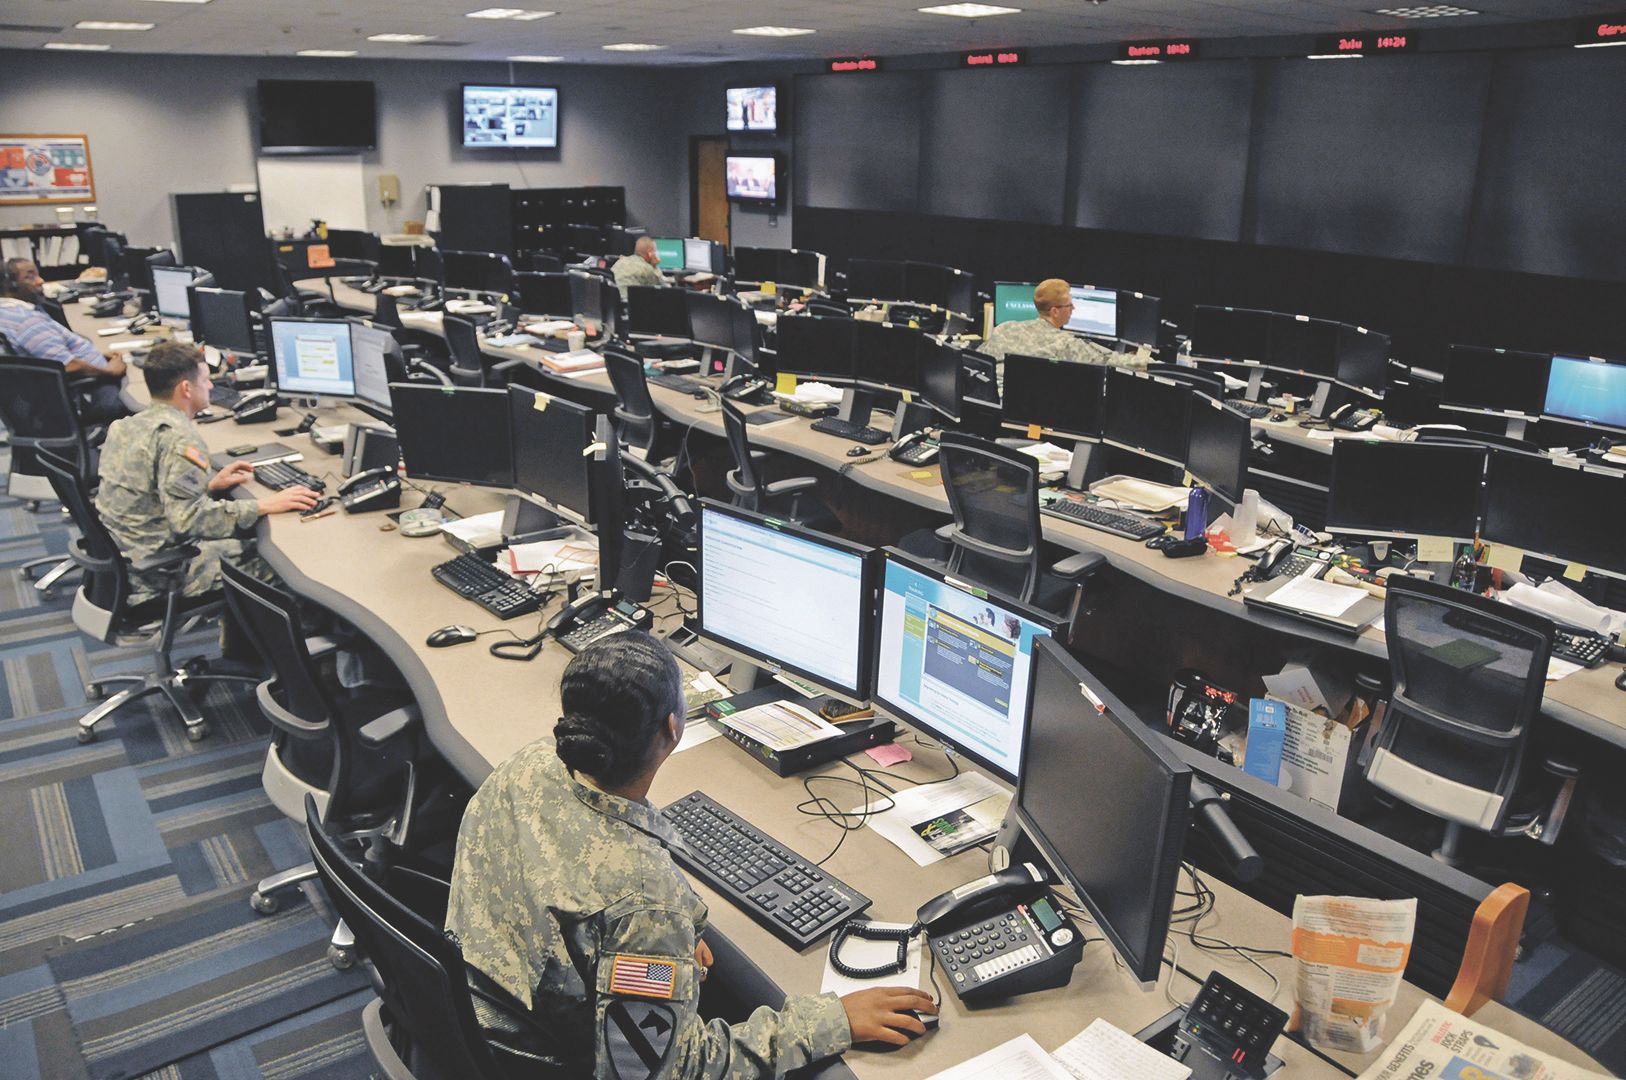 Cyber soldiers conducting operations in an office